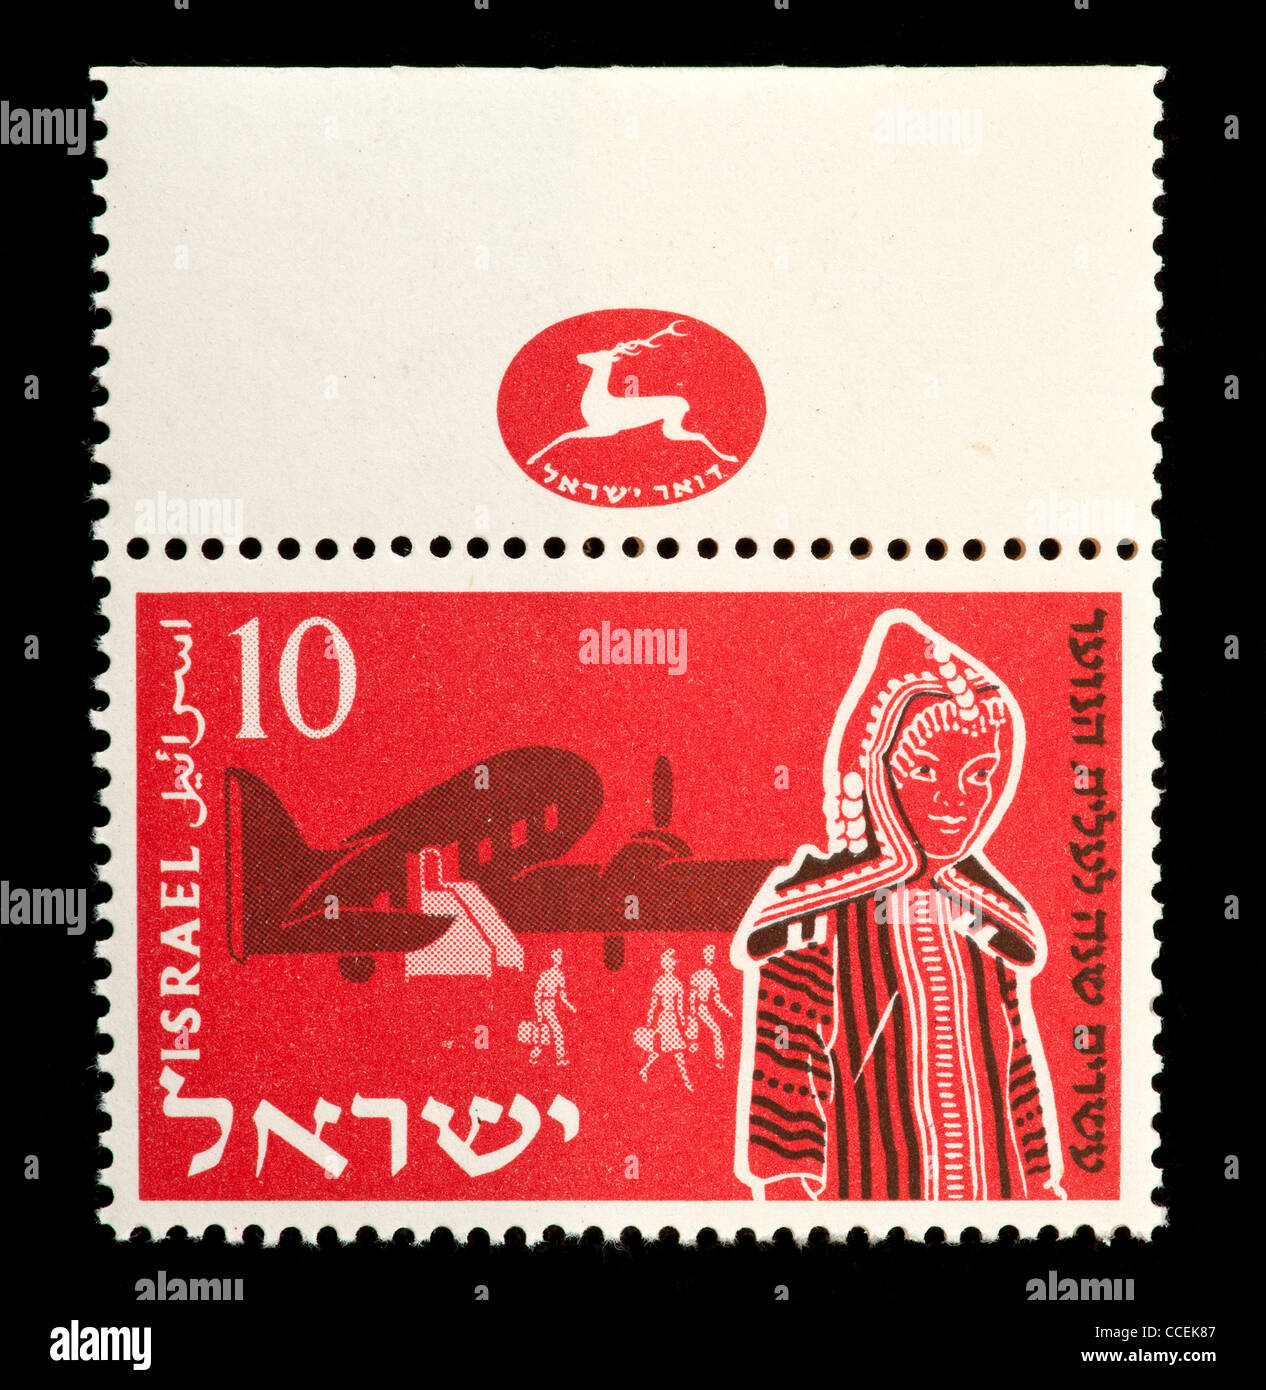 Postage stamp from Israel depicting immigration by plane Stock Photo